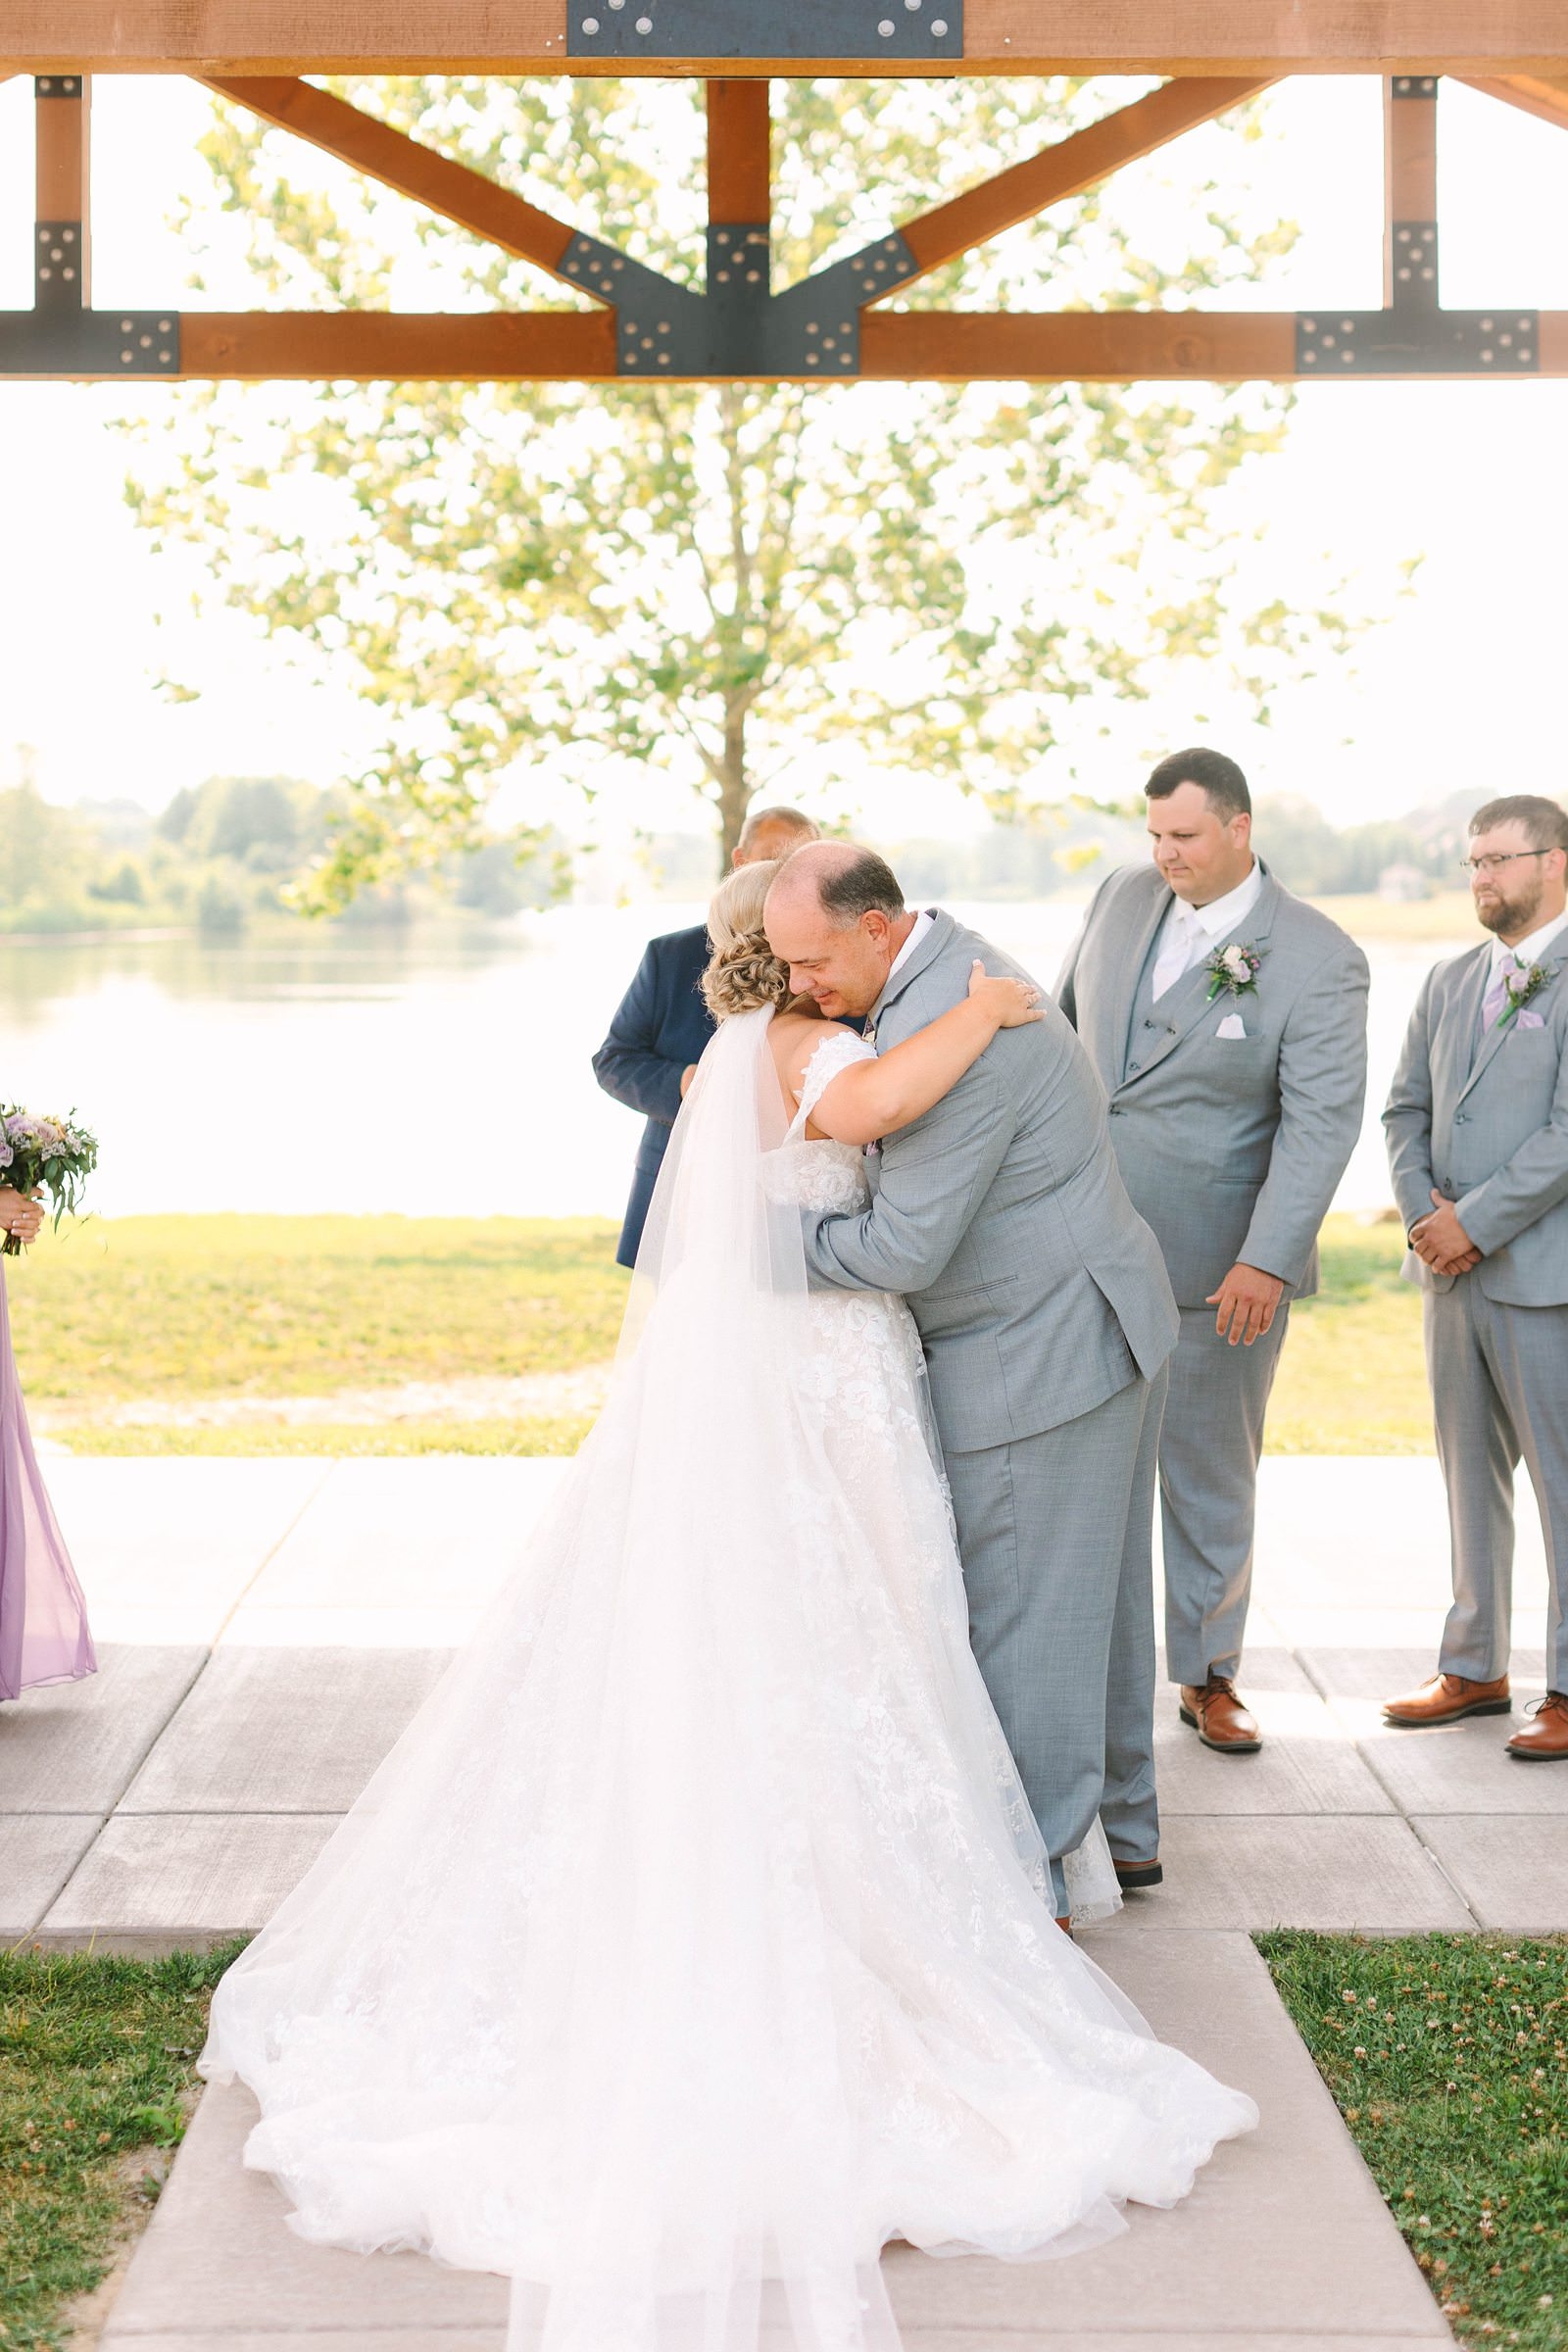 A Sunny Summer Wedding at Friedman Park in Newburgh Indiana | Paige and Dylan | Bret and Brandie Photography131.jpg